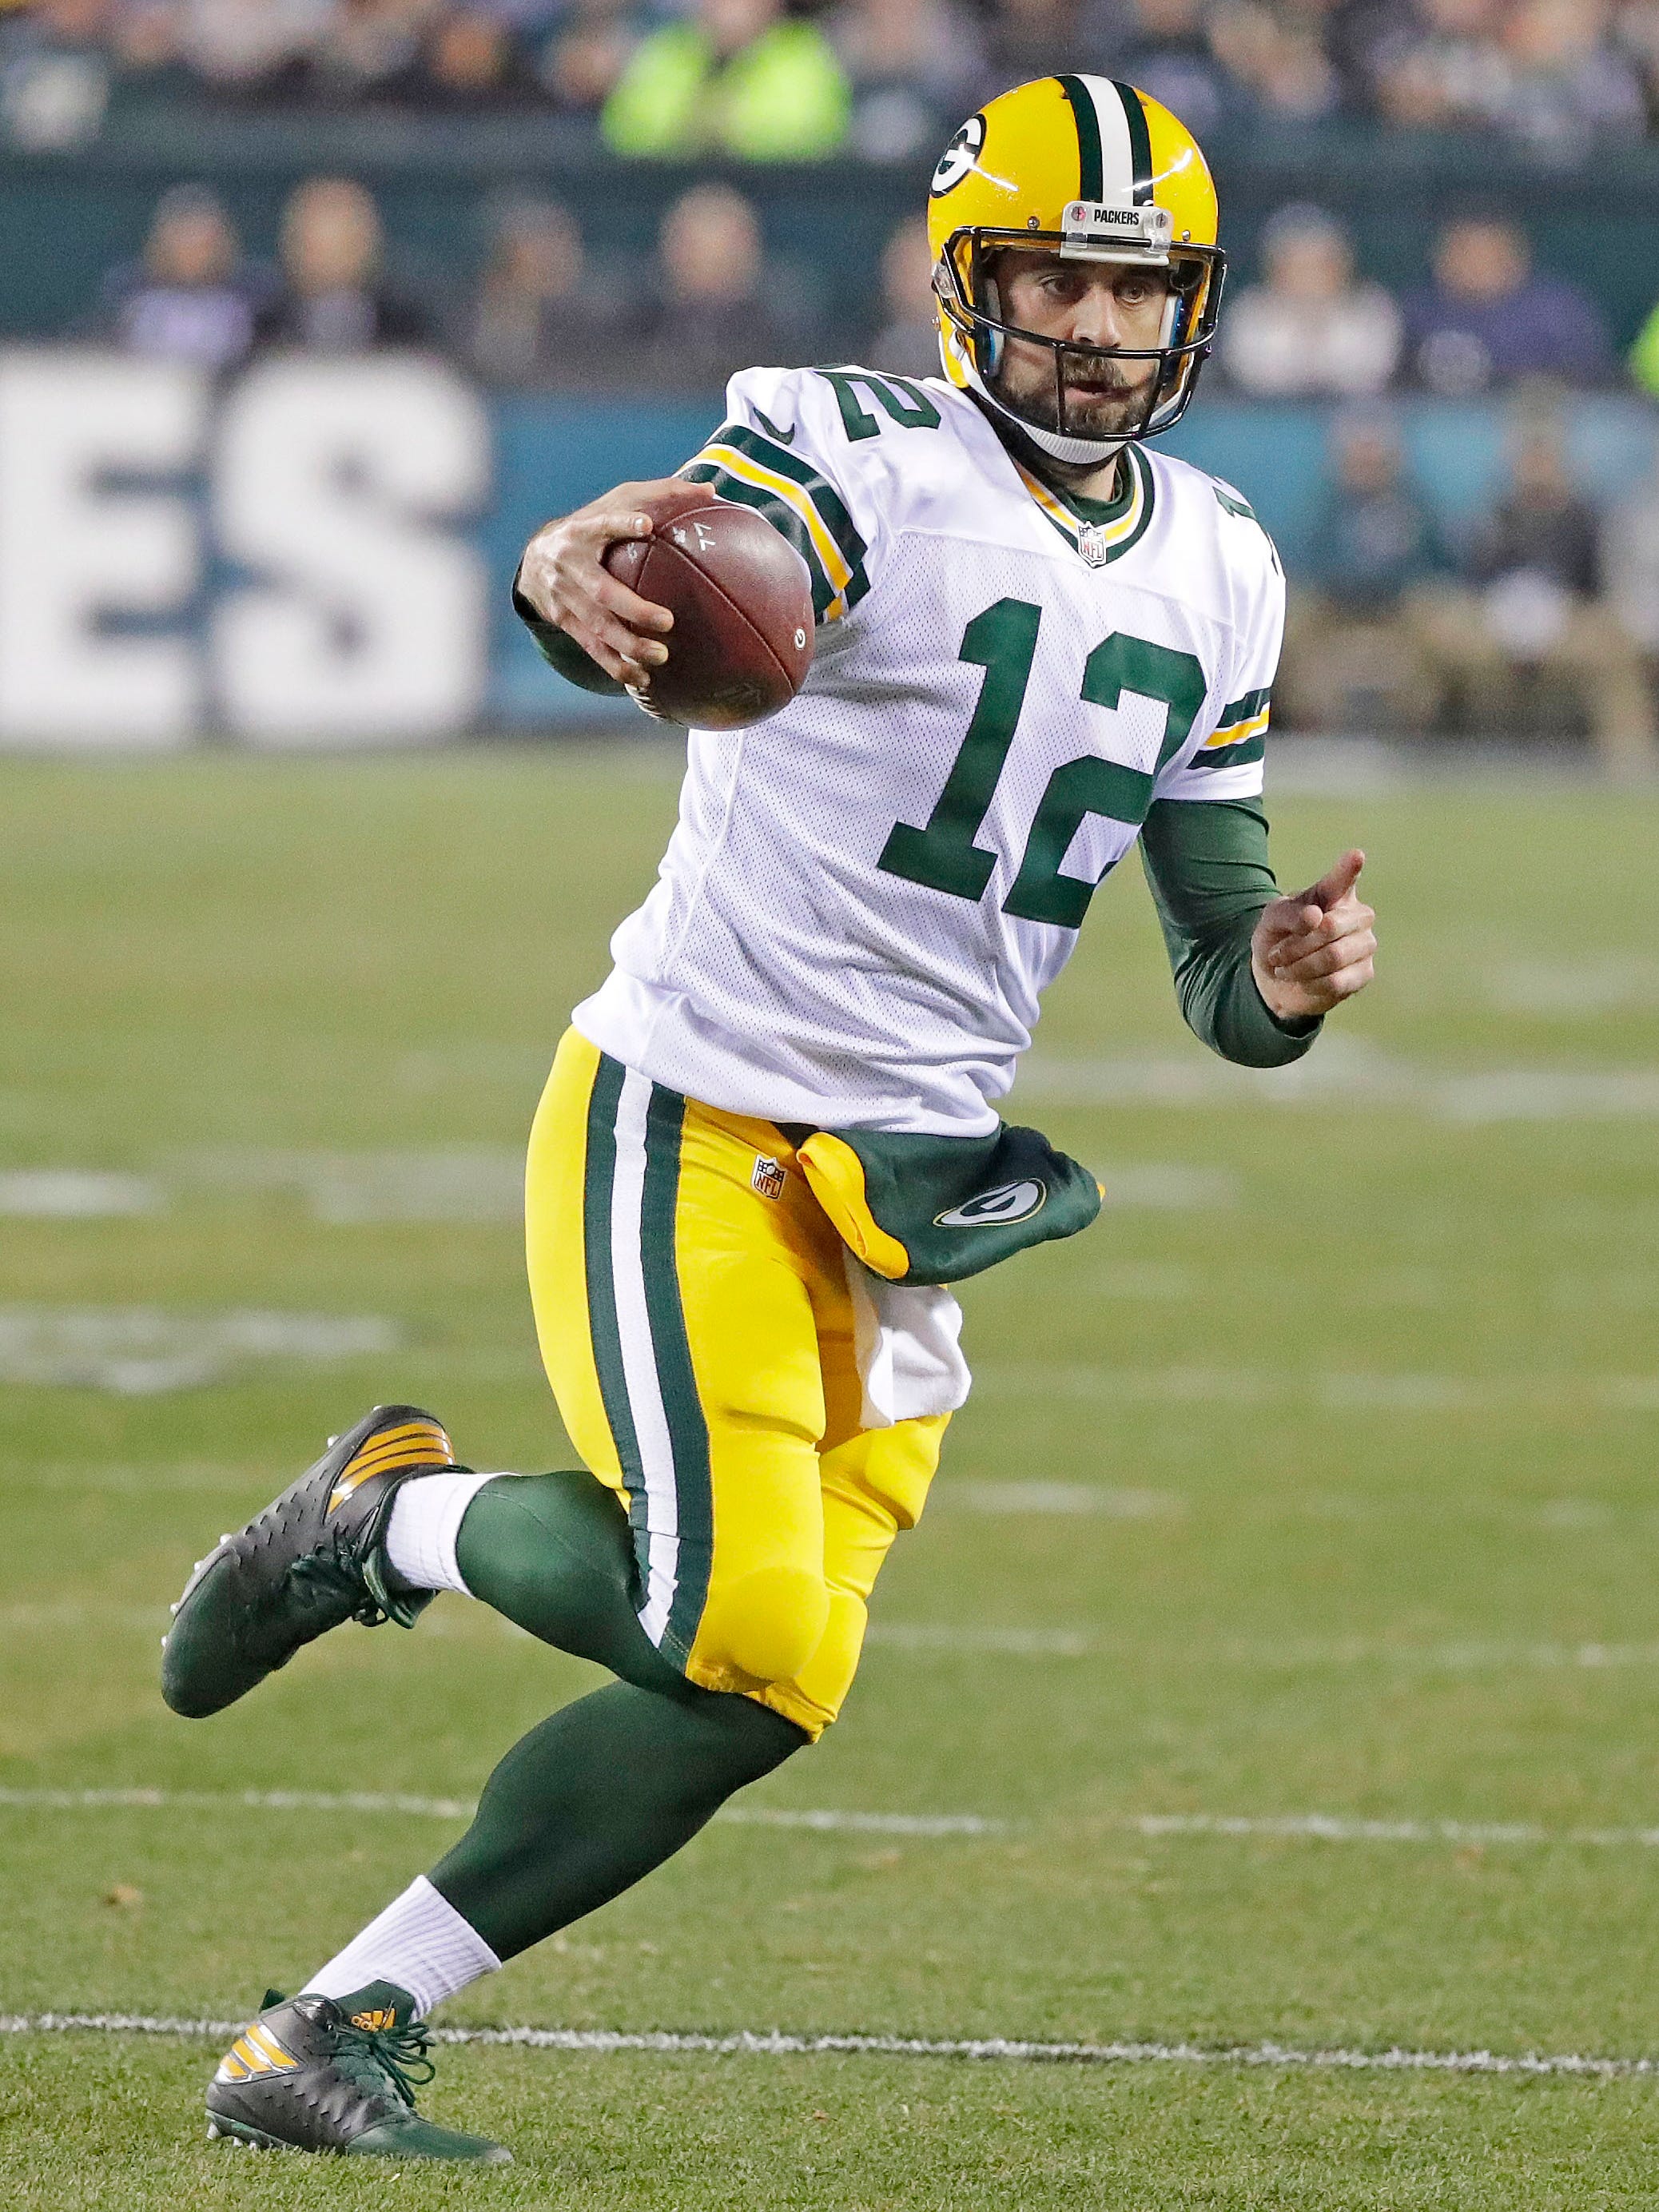 Green Bay Packers quarterback Aaron Rodgers (12) scrambles against the Philadelphia Eagles at Lincoln Financial Field in Philadelphia, PA, November 28, 2016.